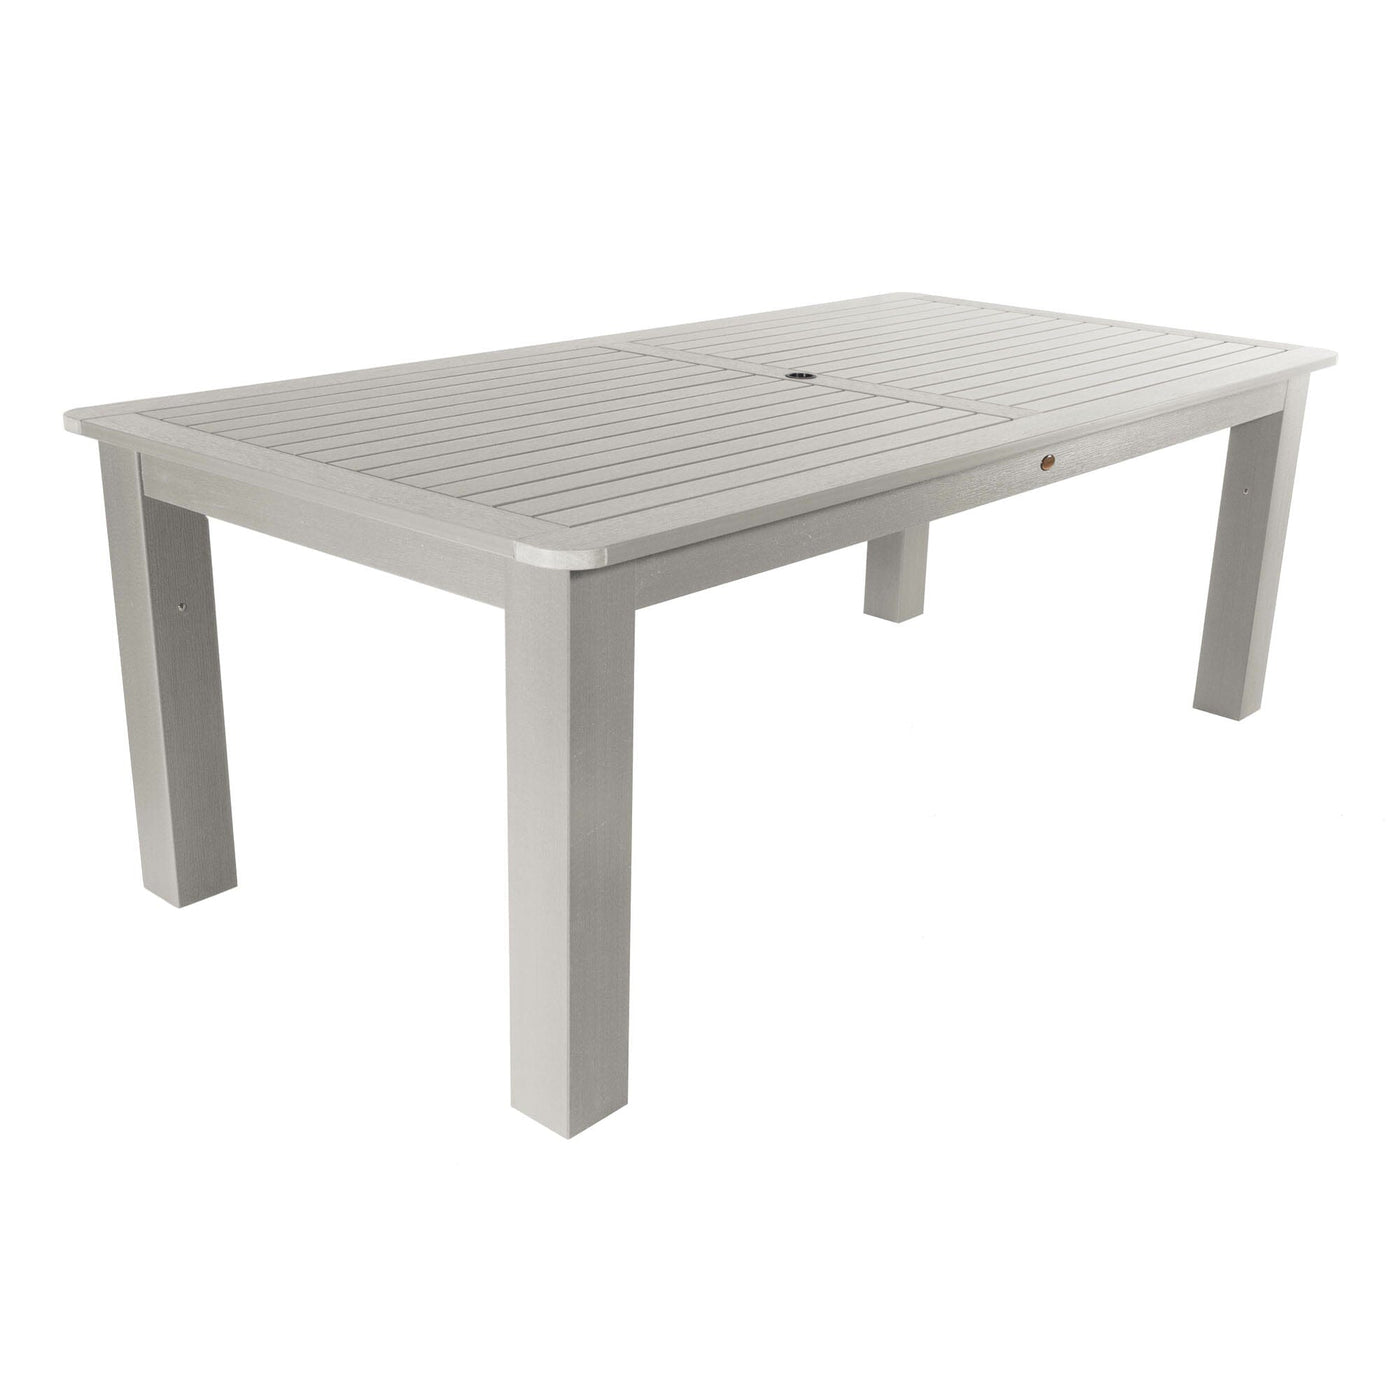 Rectangular 42in x 84in Oversized Dining Table - Dining Height Dining Highwood USA Harbor Gray 